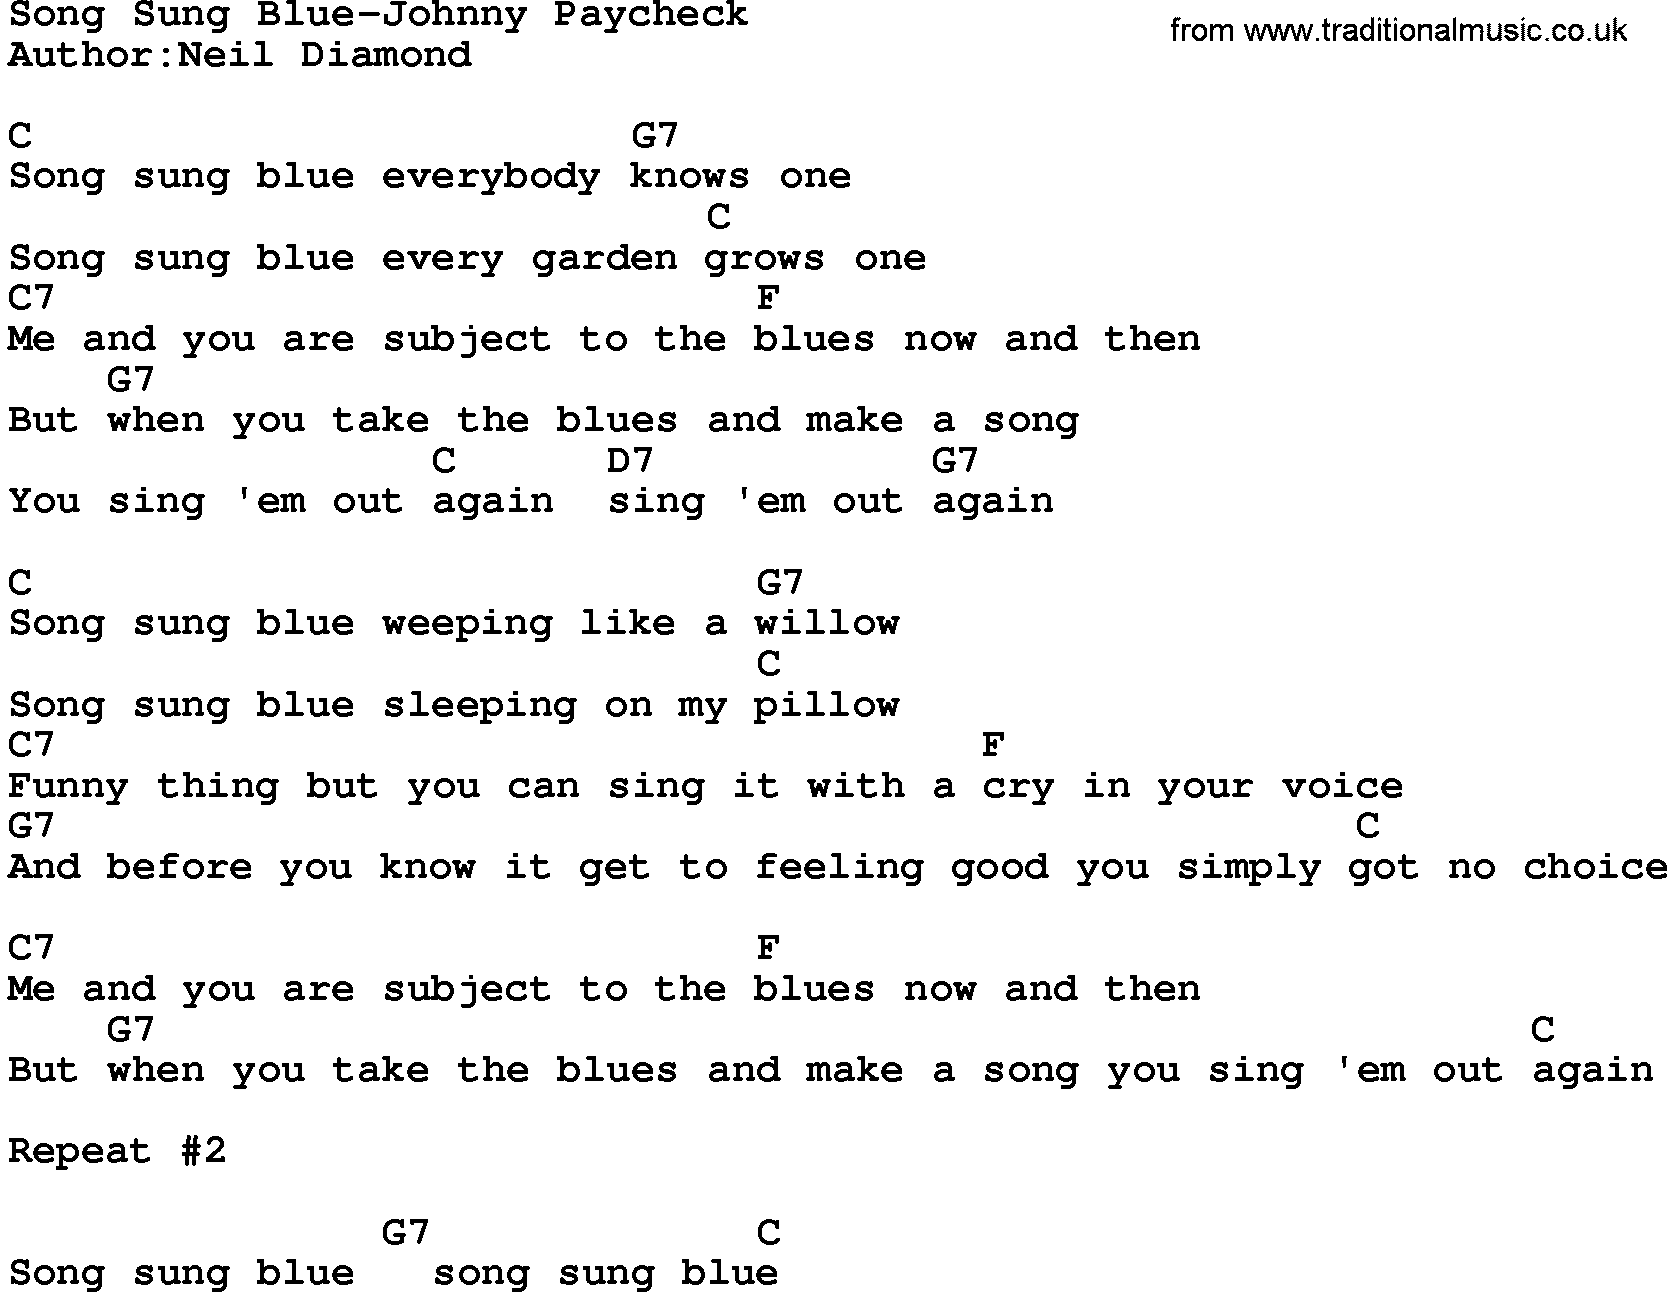 Country music song: Song Sung Blue-Johnny Paycheck lyrics and chords